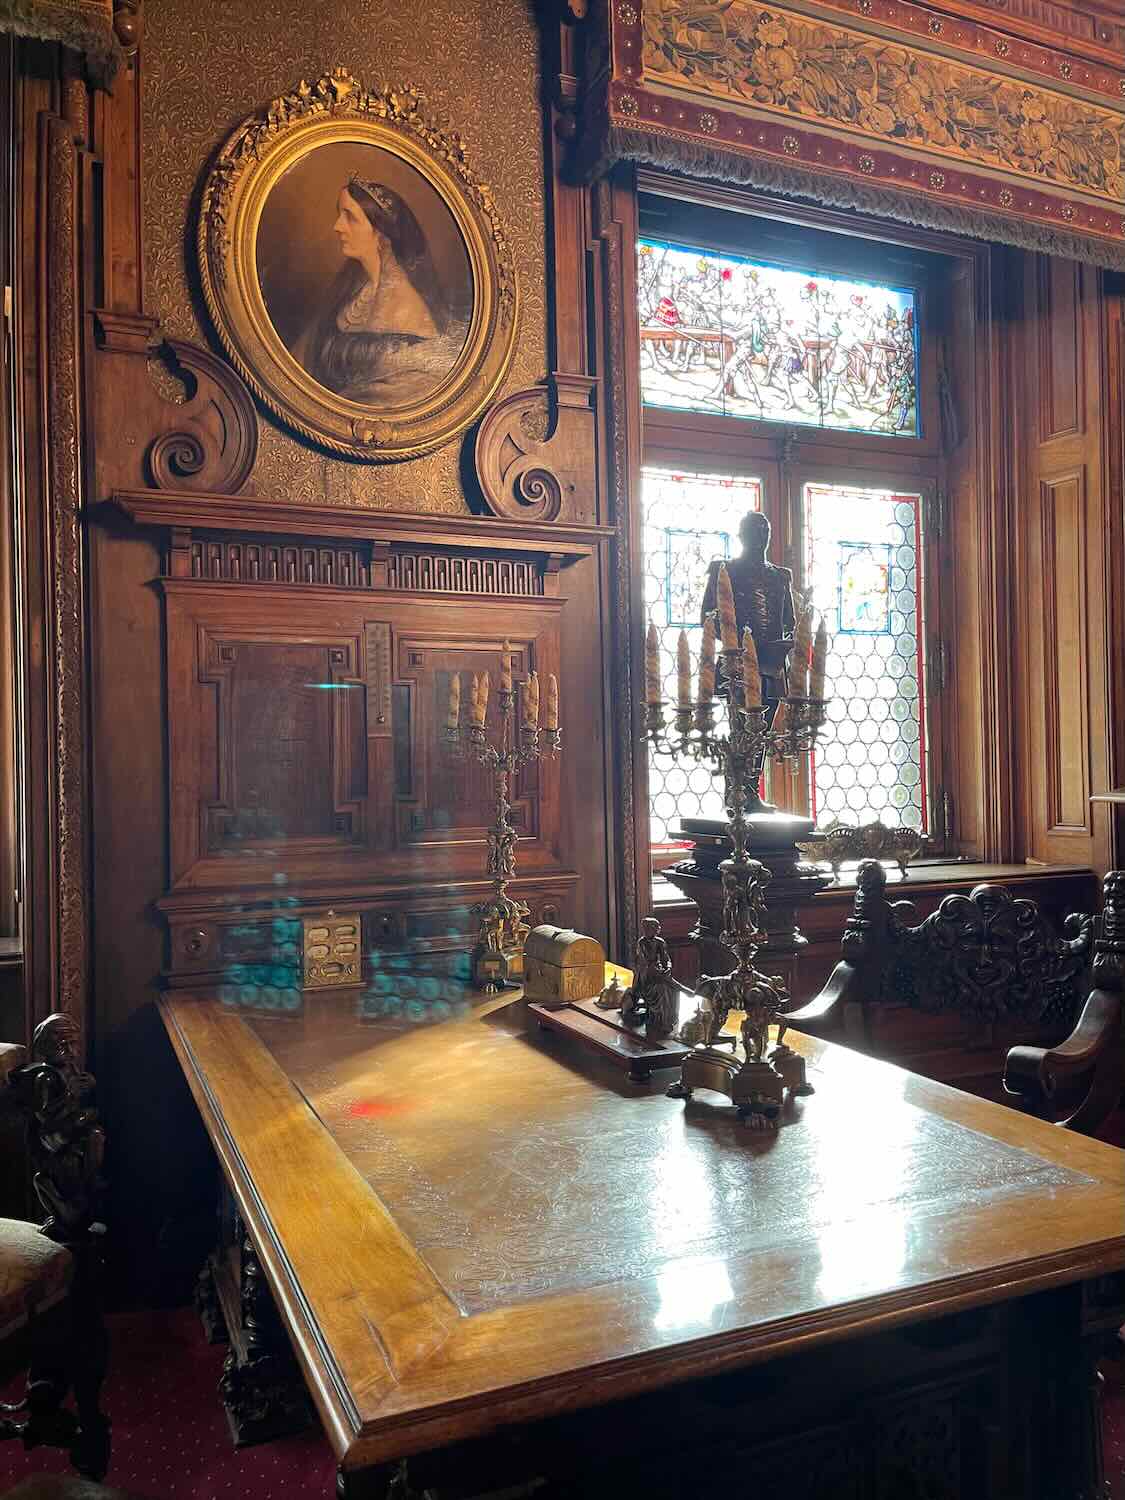 Richly carved wooden interior of a castle with an ornate portrait, detailed wall panels, and a stained glass window casting colorful light on an armor suit, exuding historical opulence.